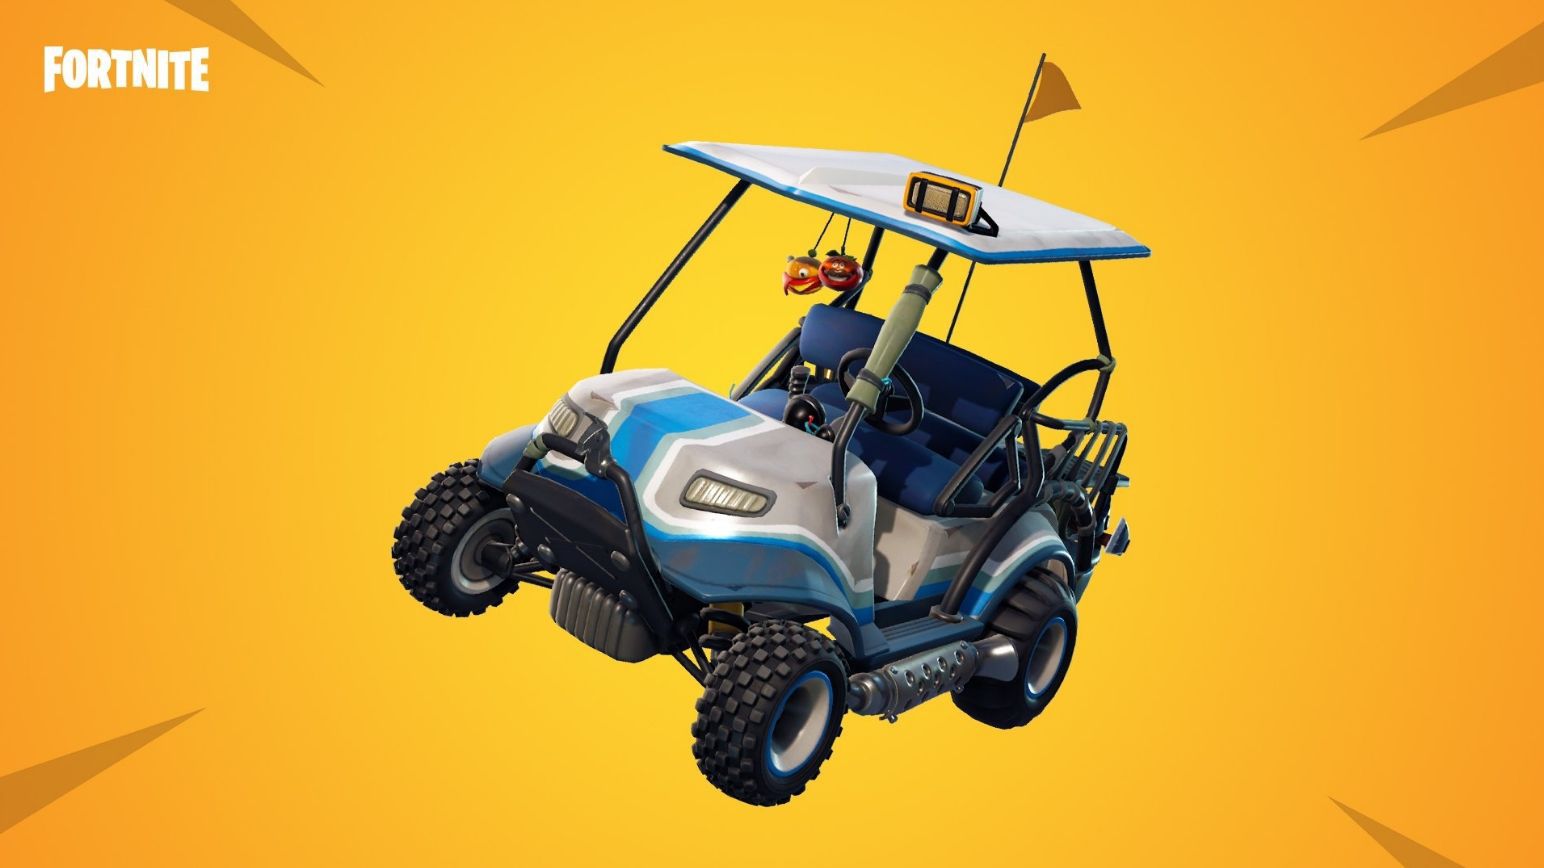 fortnite s all terrain kart what are they how to use them and where to find them let s talk about fortnite s newest vehicle - new fortnite vehicles location